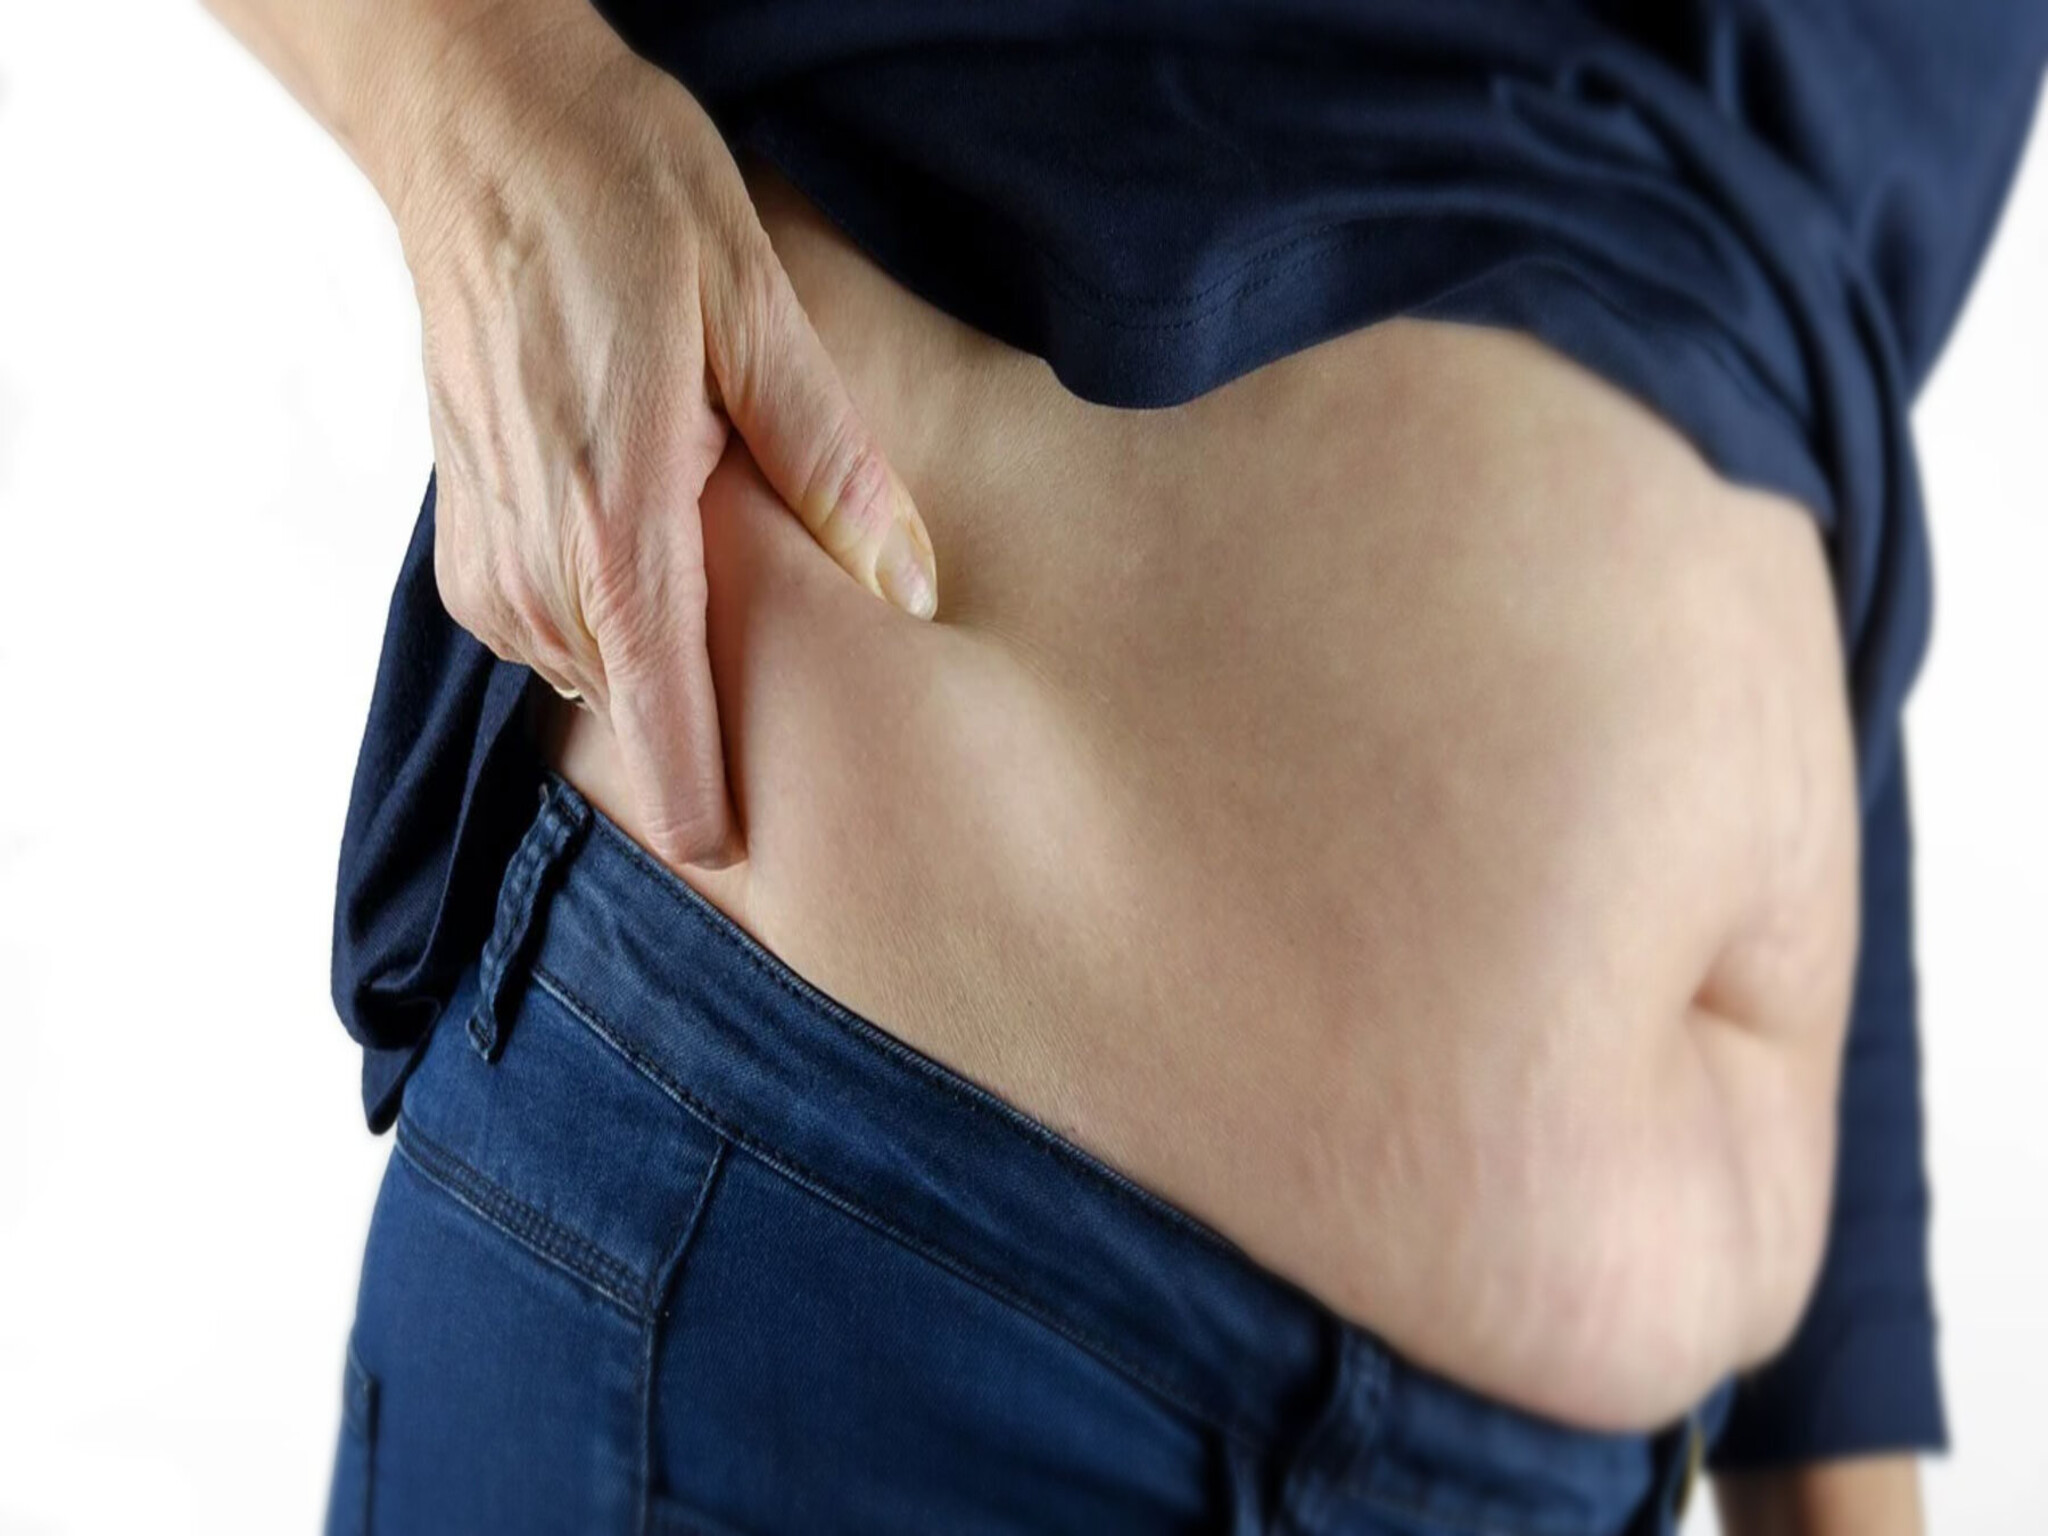 How can I get rid of the excess fat around my waist?